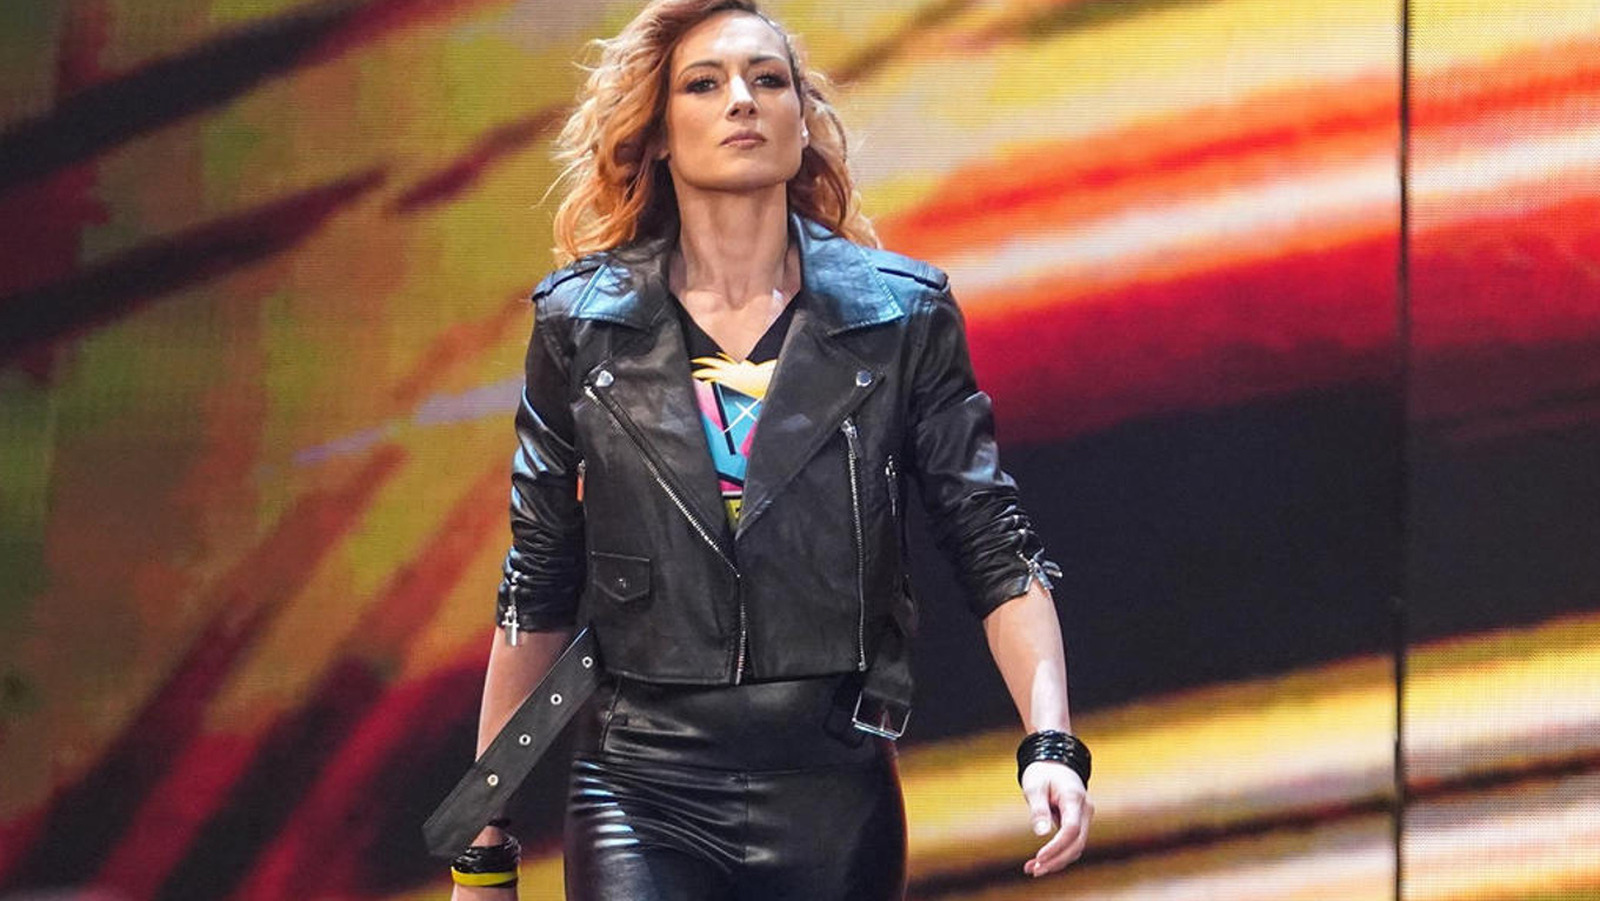 Becky Lynch Clinches WWE NXT Women's Title Over Stratton